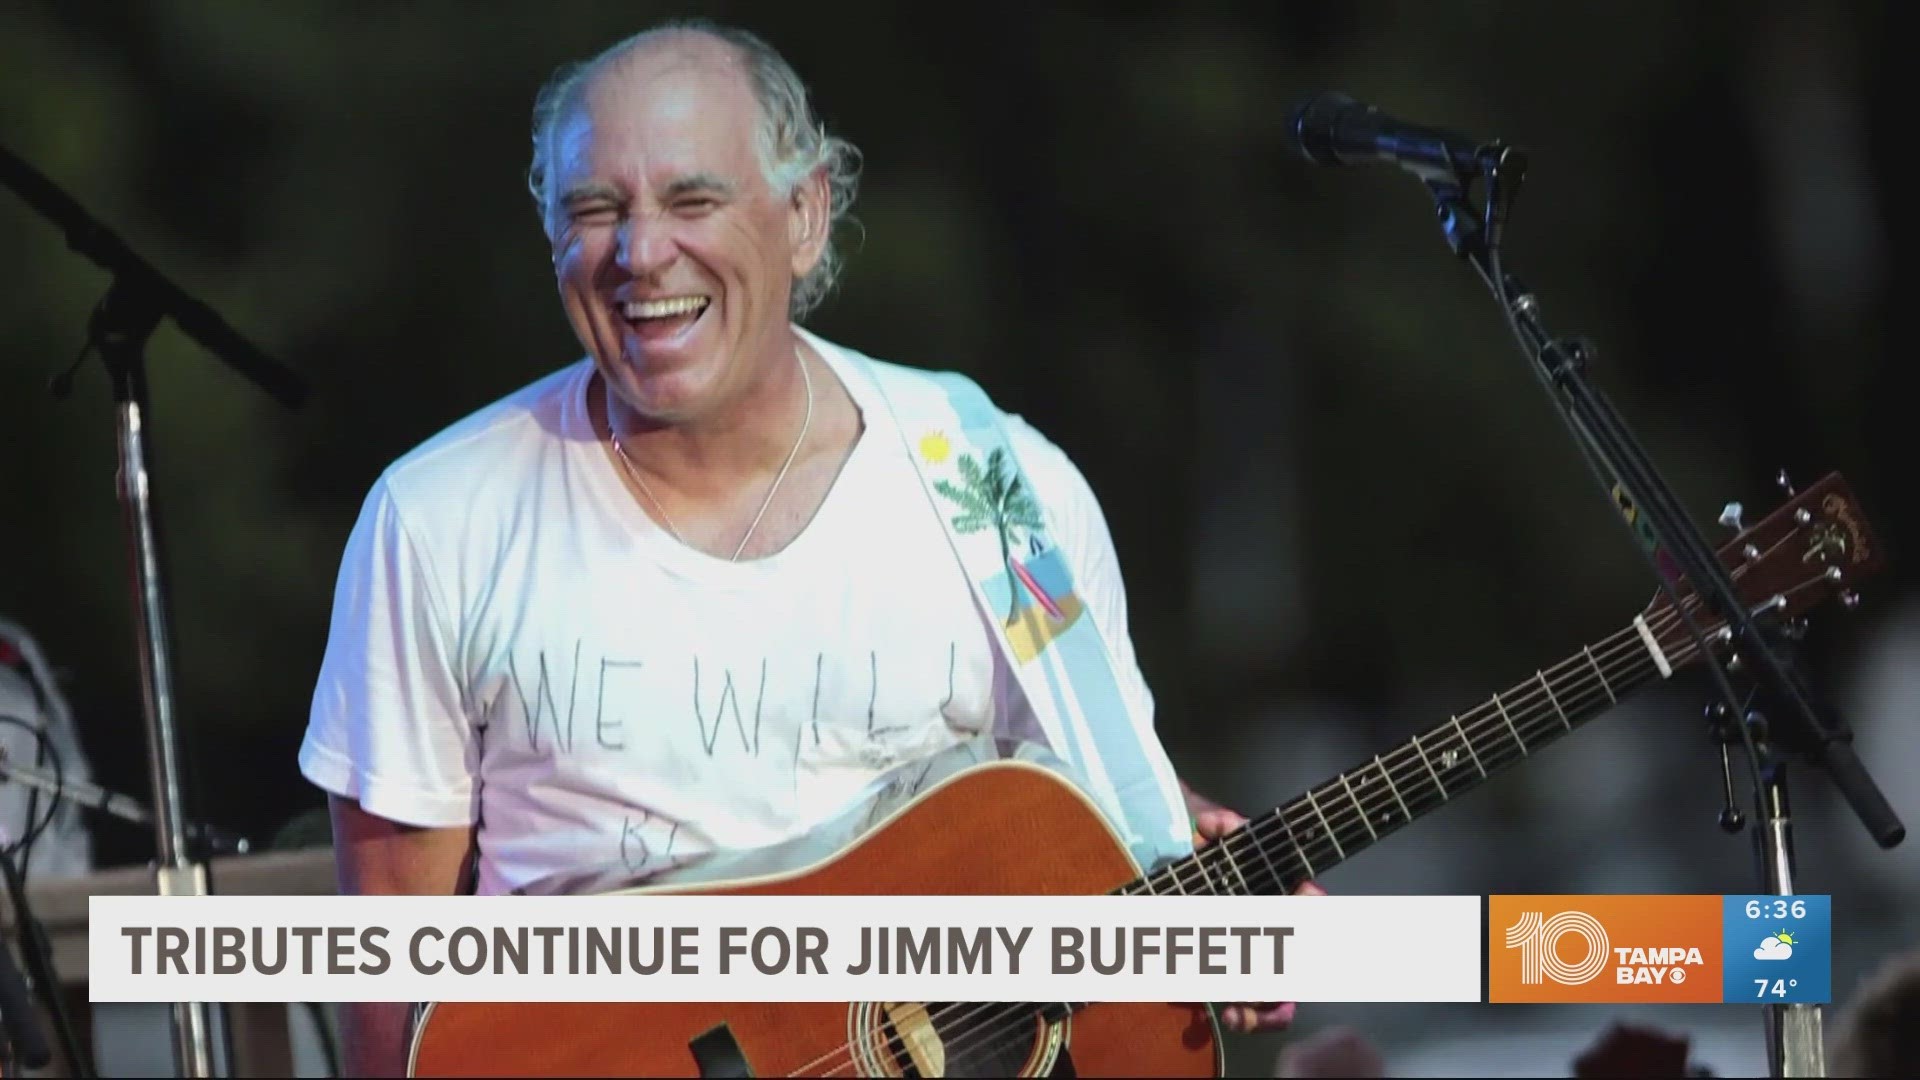 The "Margaritaville" singer-songwriter died over the weekend at 76 years of age. Fellow musicians pay tribute to Buffett.